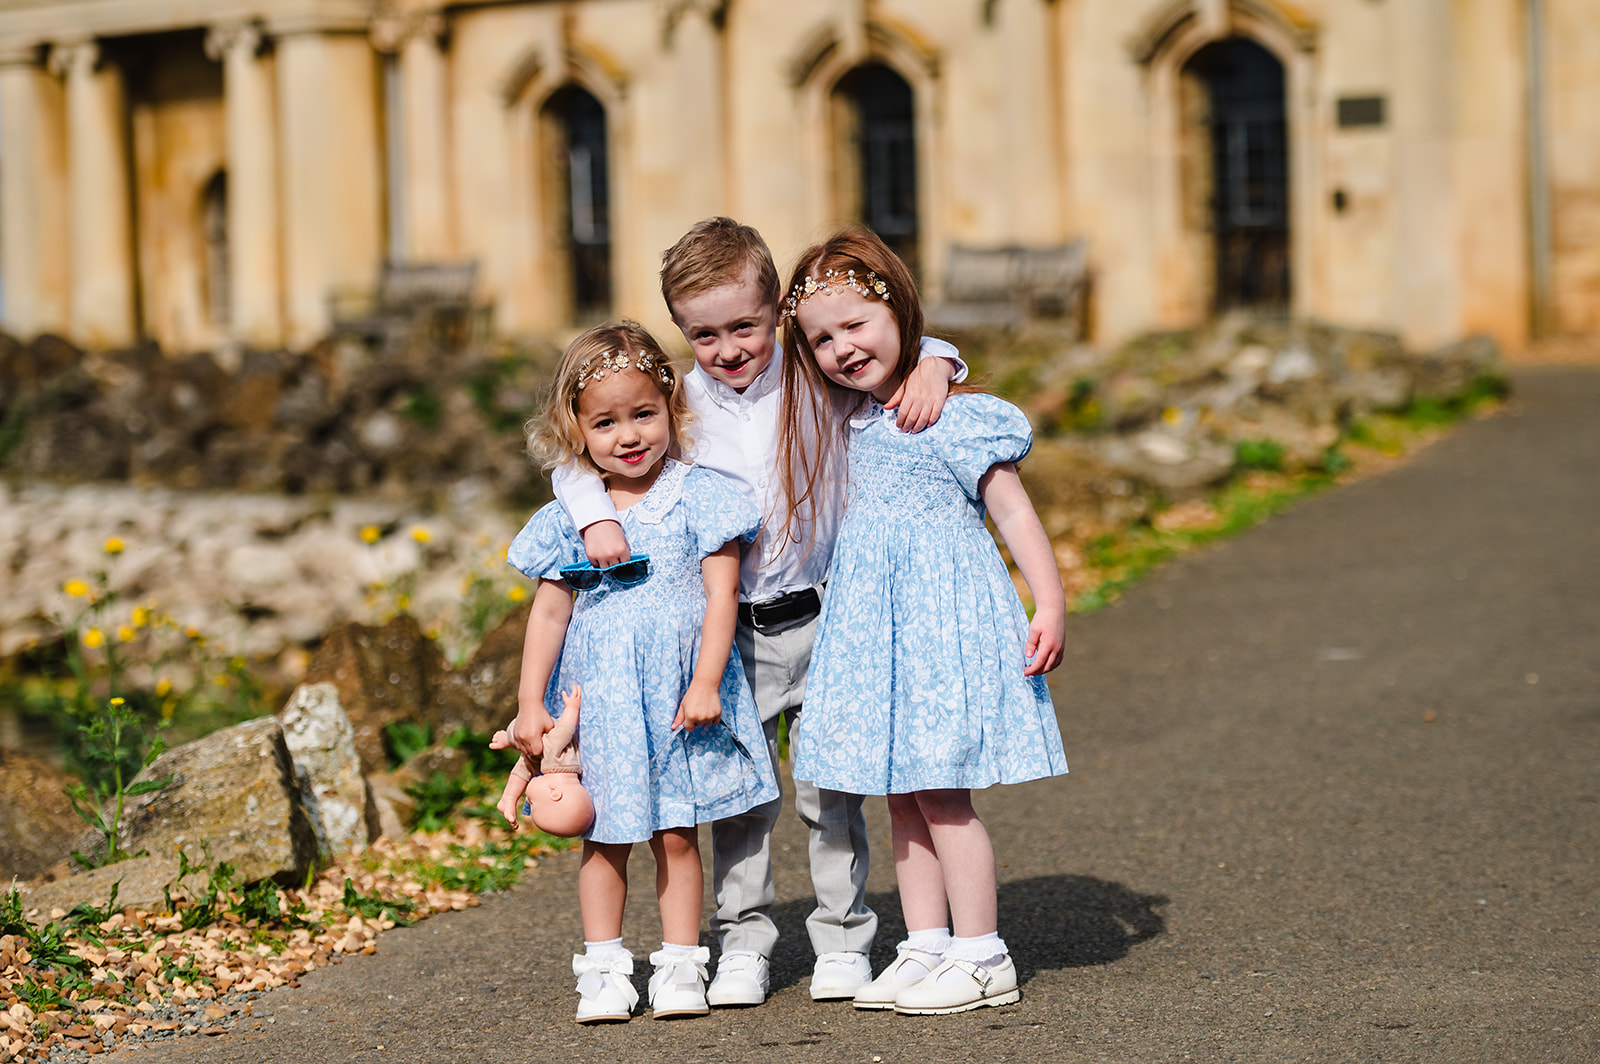 Flower girls and page boy cuddling outside normanton church ahead of their parents wedding